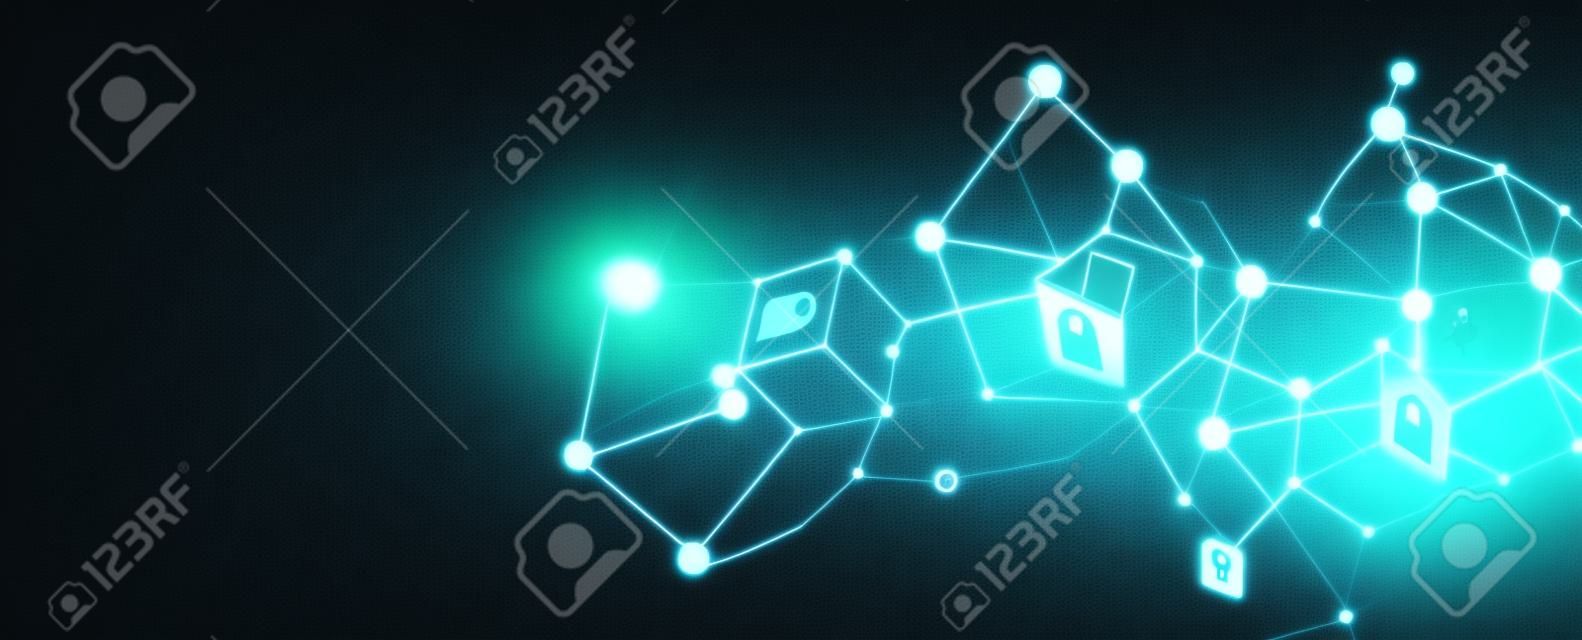 Cybersecurity and information or network protection. Future cyber technology web services for business and internet project